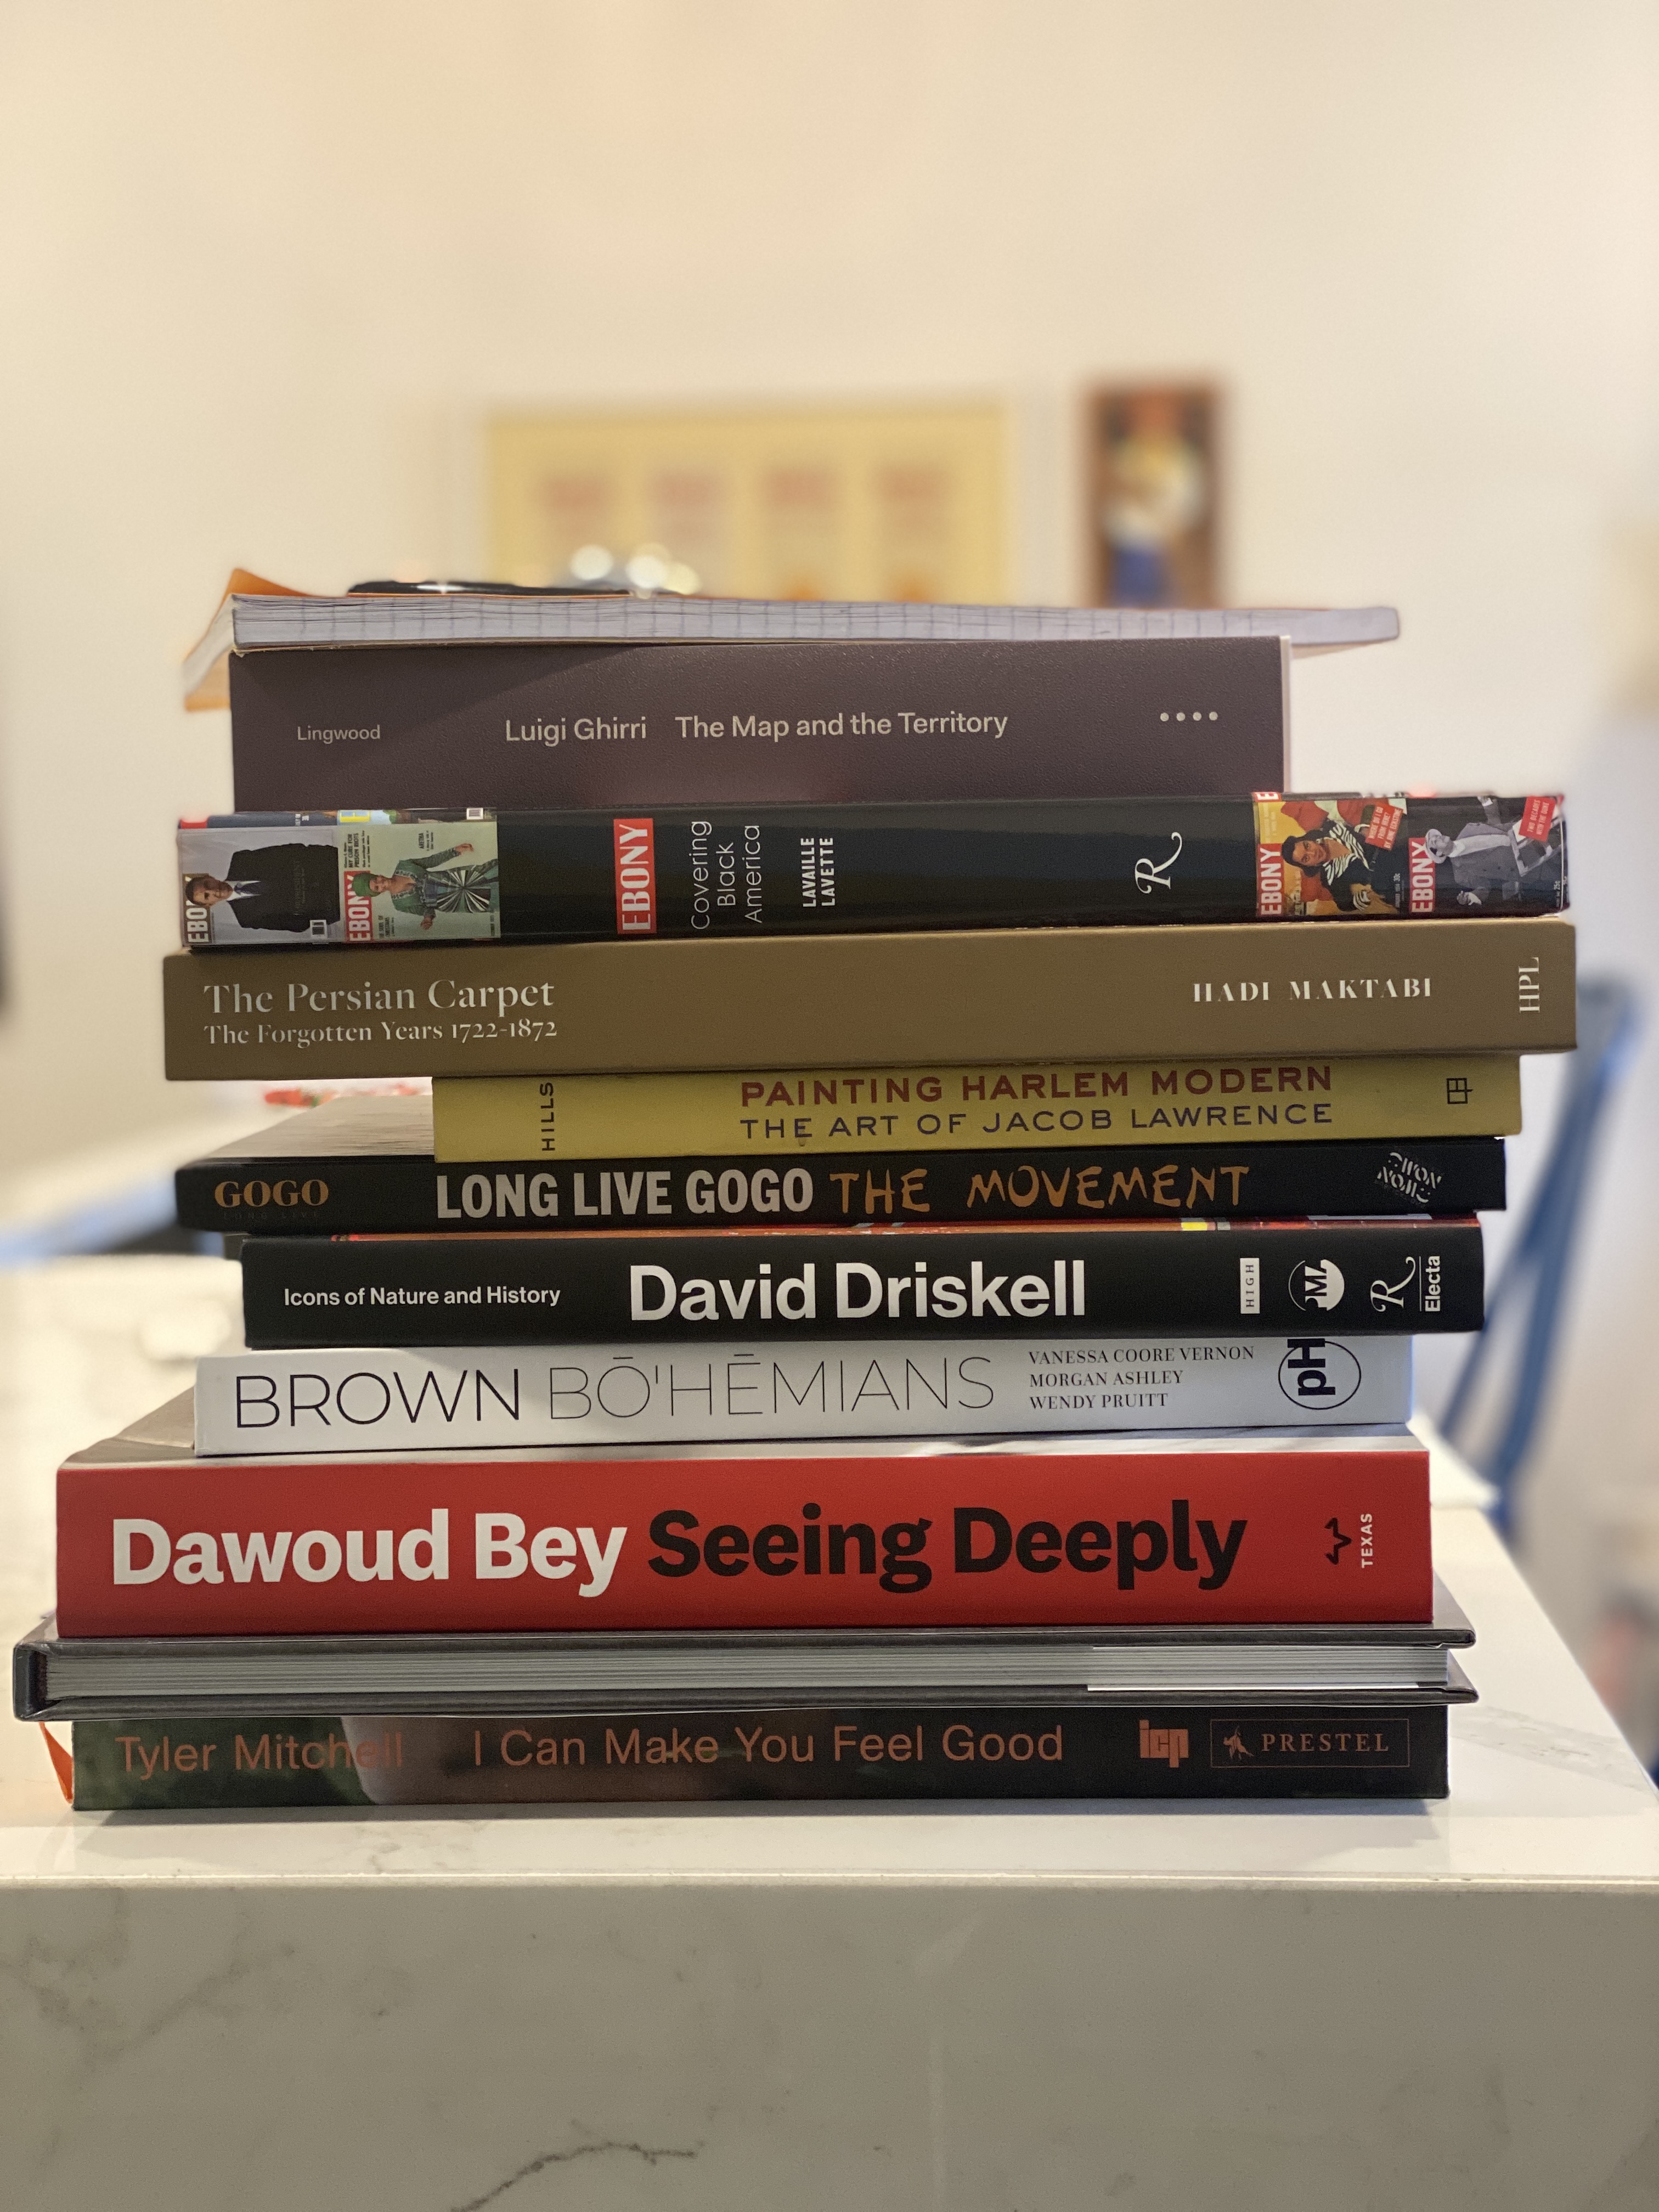 A stack of 11 books and notebooks with the bindings in view. Most are about art, culture, and representation. Among the books are Dawoud Bey's 'Seeing Deeply,' Patricia Hill's 'Painting Harlem Modern,' and James Lingwood's book on Luigi Ghirri 'The Map and the Territory.'